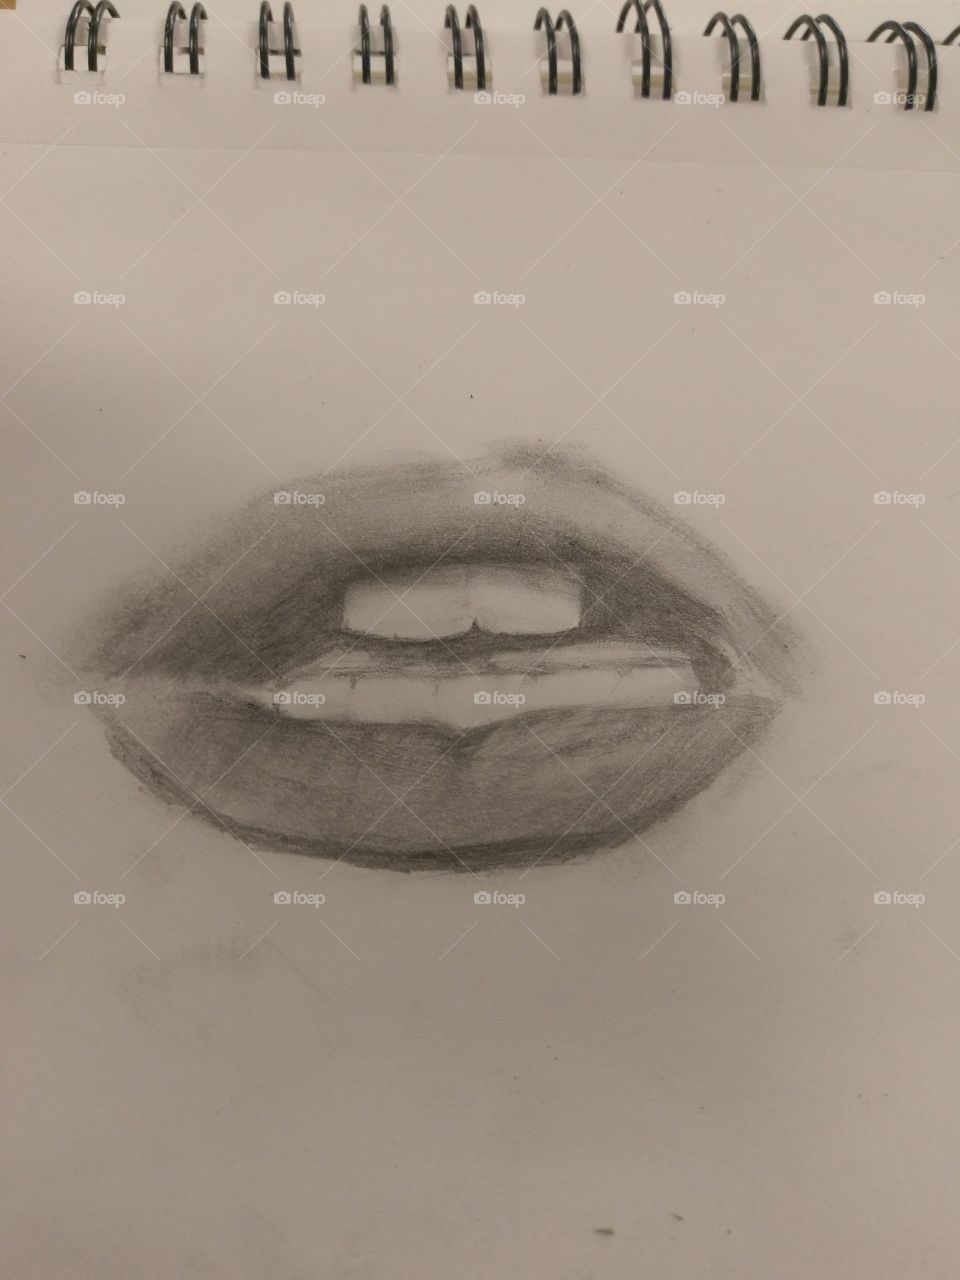 Mouth drawing 